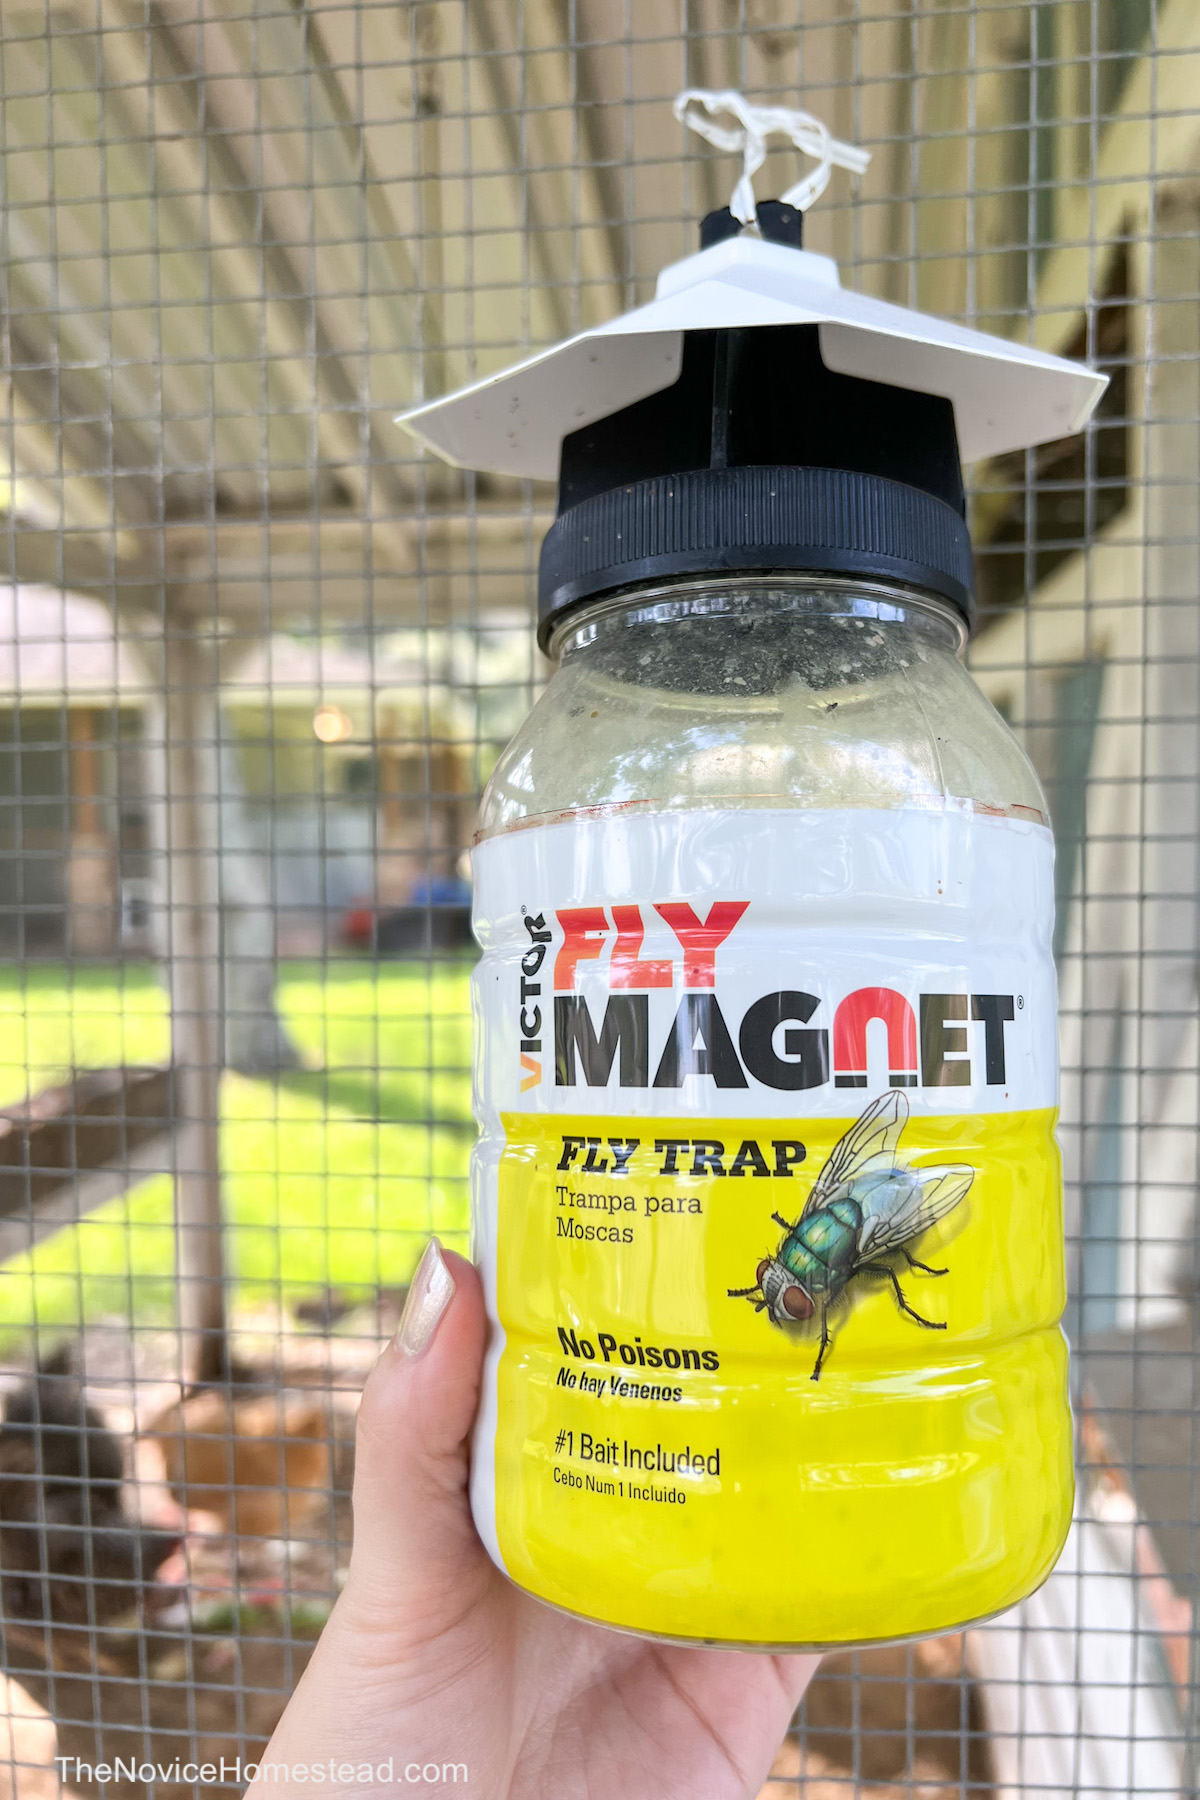 bright yellow fly trap with label: "Fly Magnet"